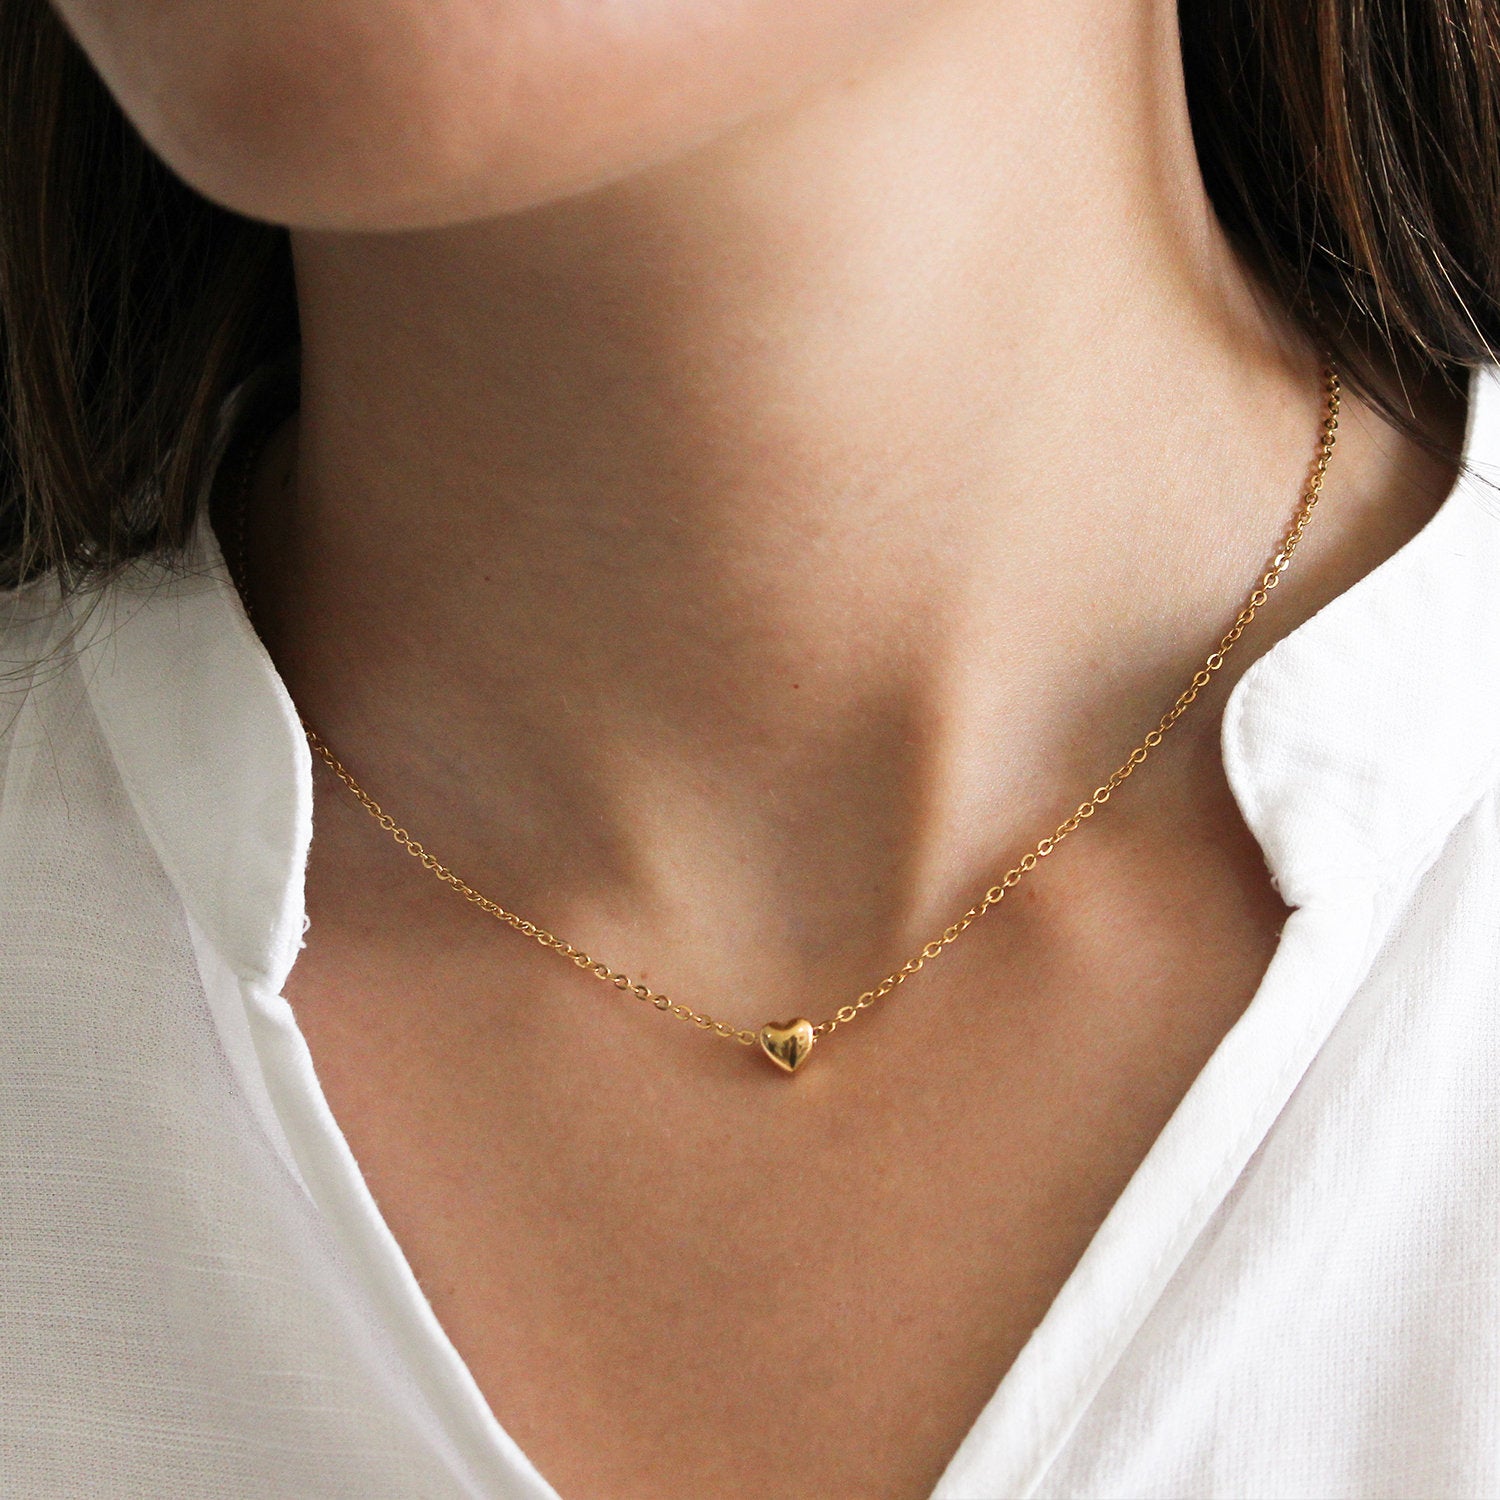 Heart Necklace (Gold-Plated)